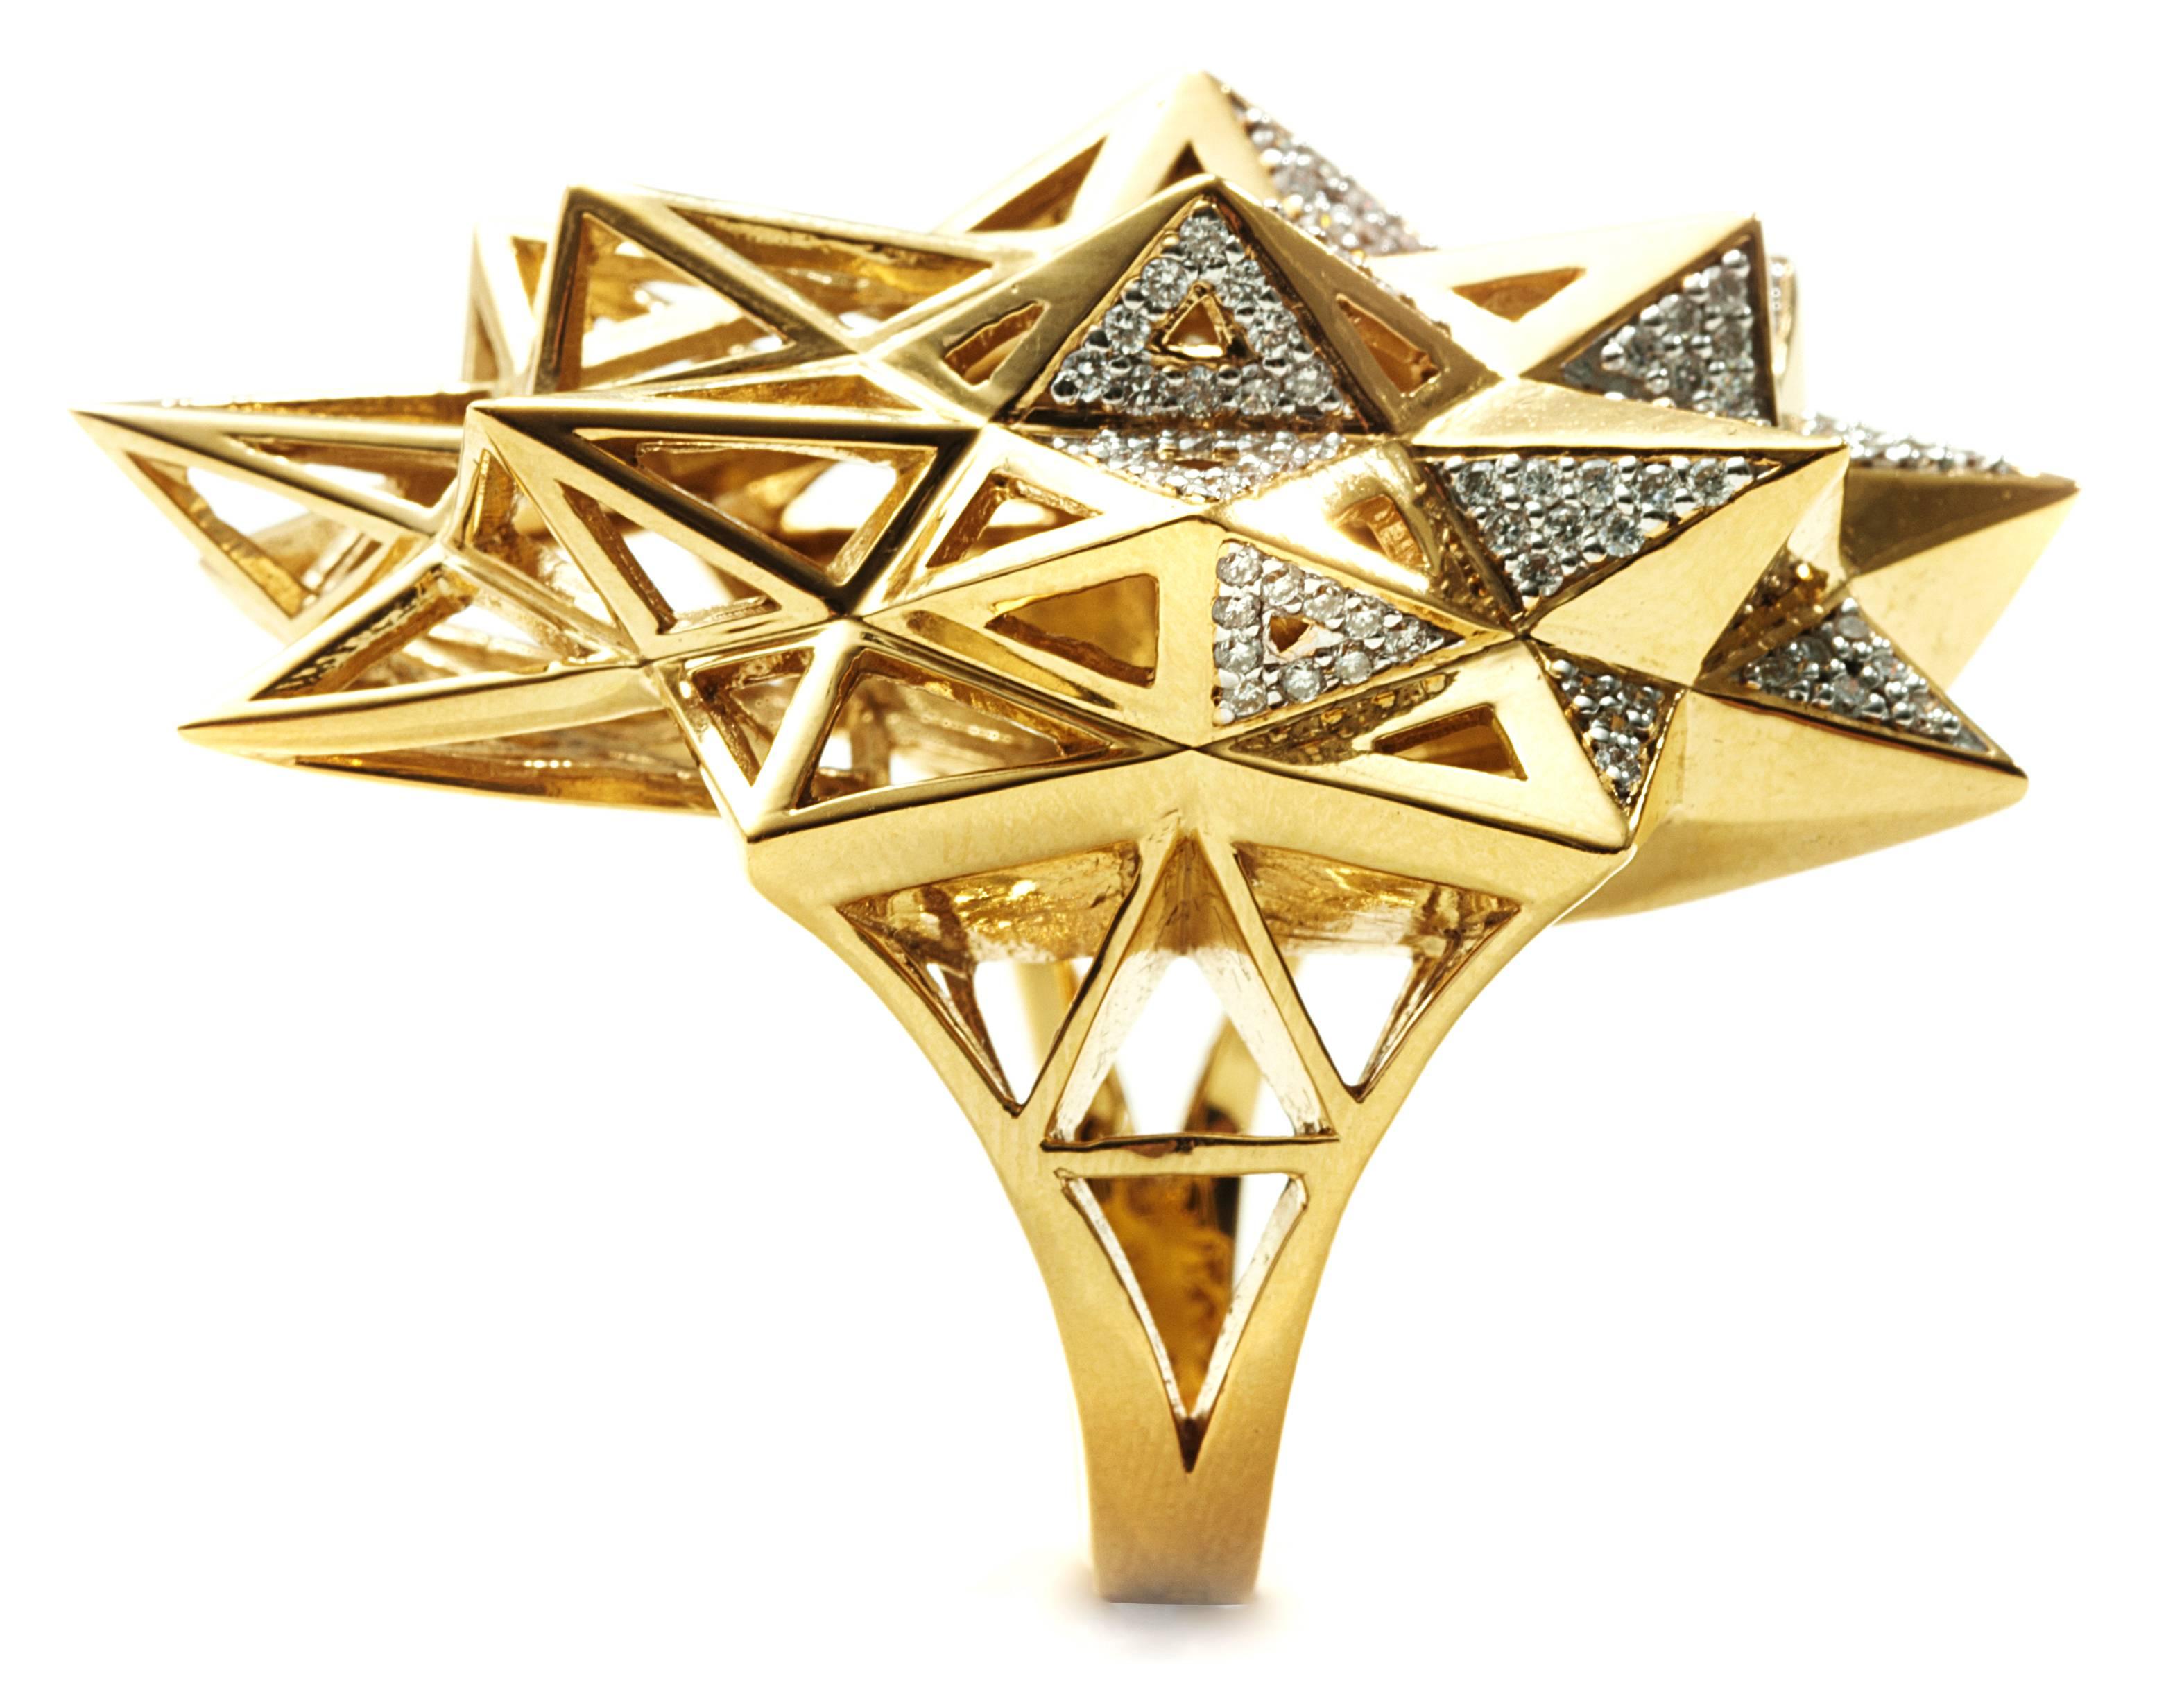 This limited edition piece is inspired by sacred geometries and patterns in nature.  These sculptural star tetrahedron earrings are from the John Brevard Verahedra series. The interlocking hedral geometries of the Verahedra series are reminiscent of